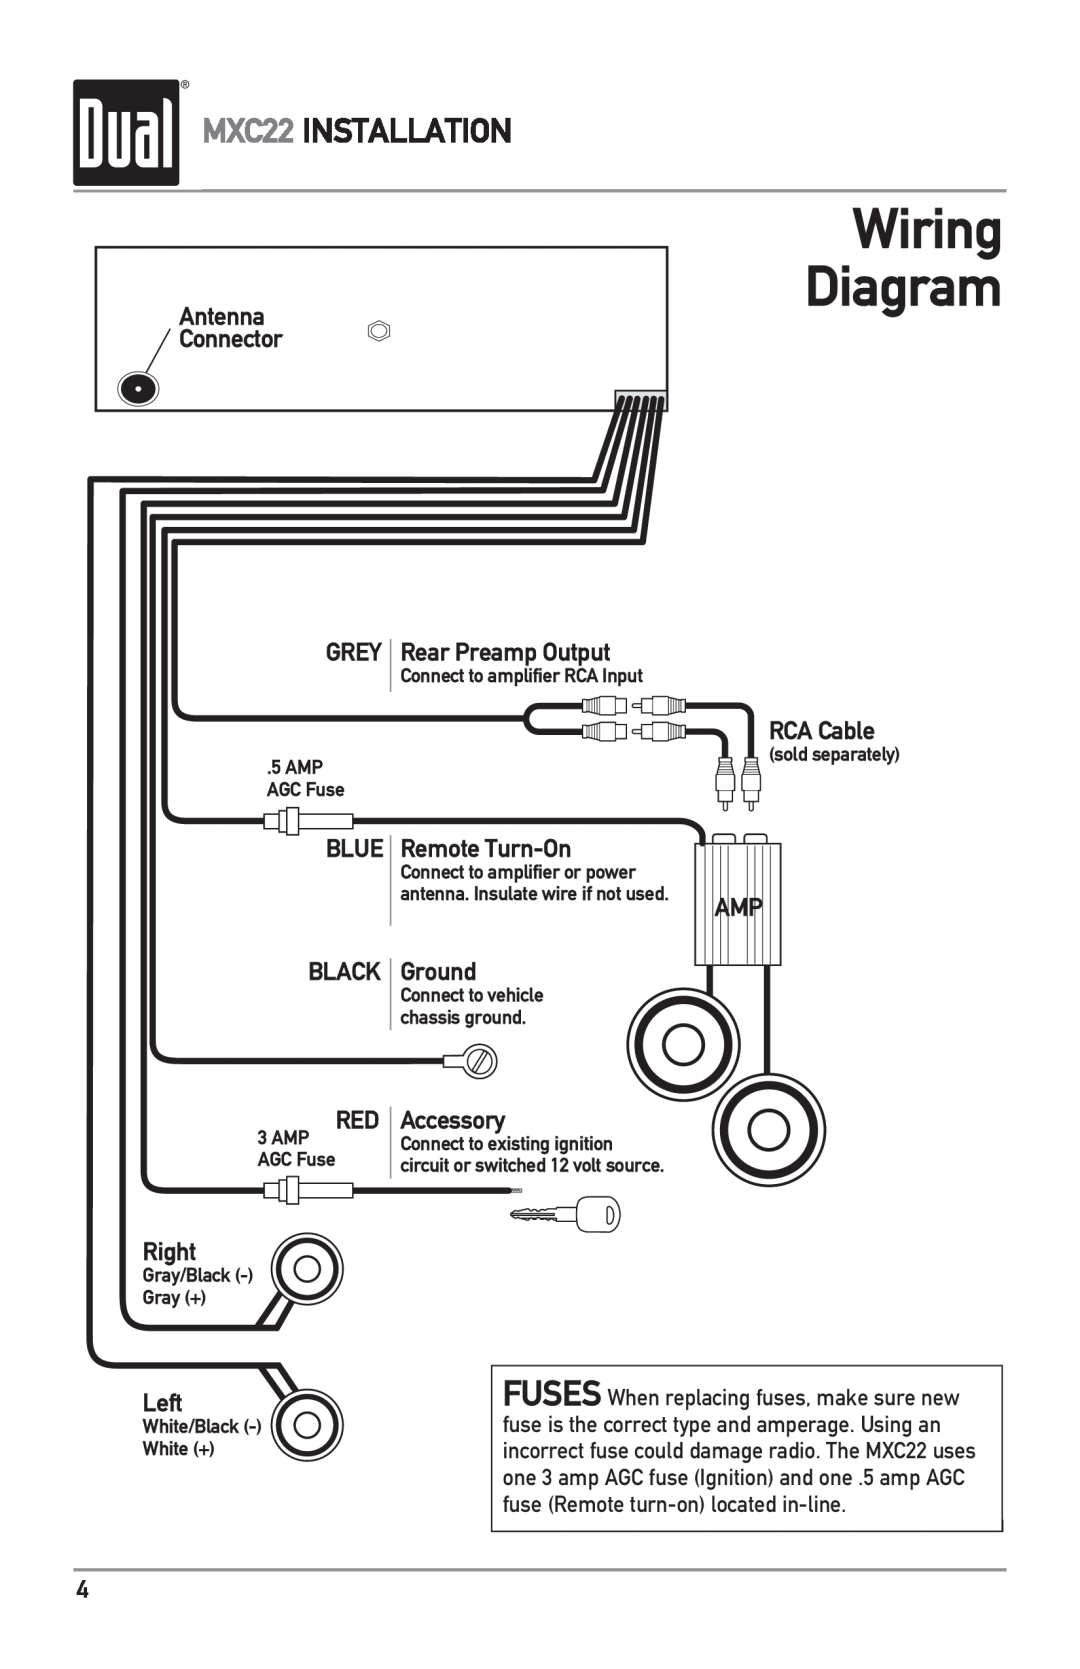 Dual Wiring Diagram, MXC22 INSTALLATION, Antenna, Connector GREY Rear Preamp Output, RCA Cable, Blue Black, Right, Left 